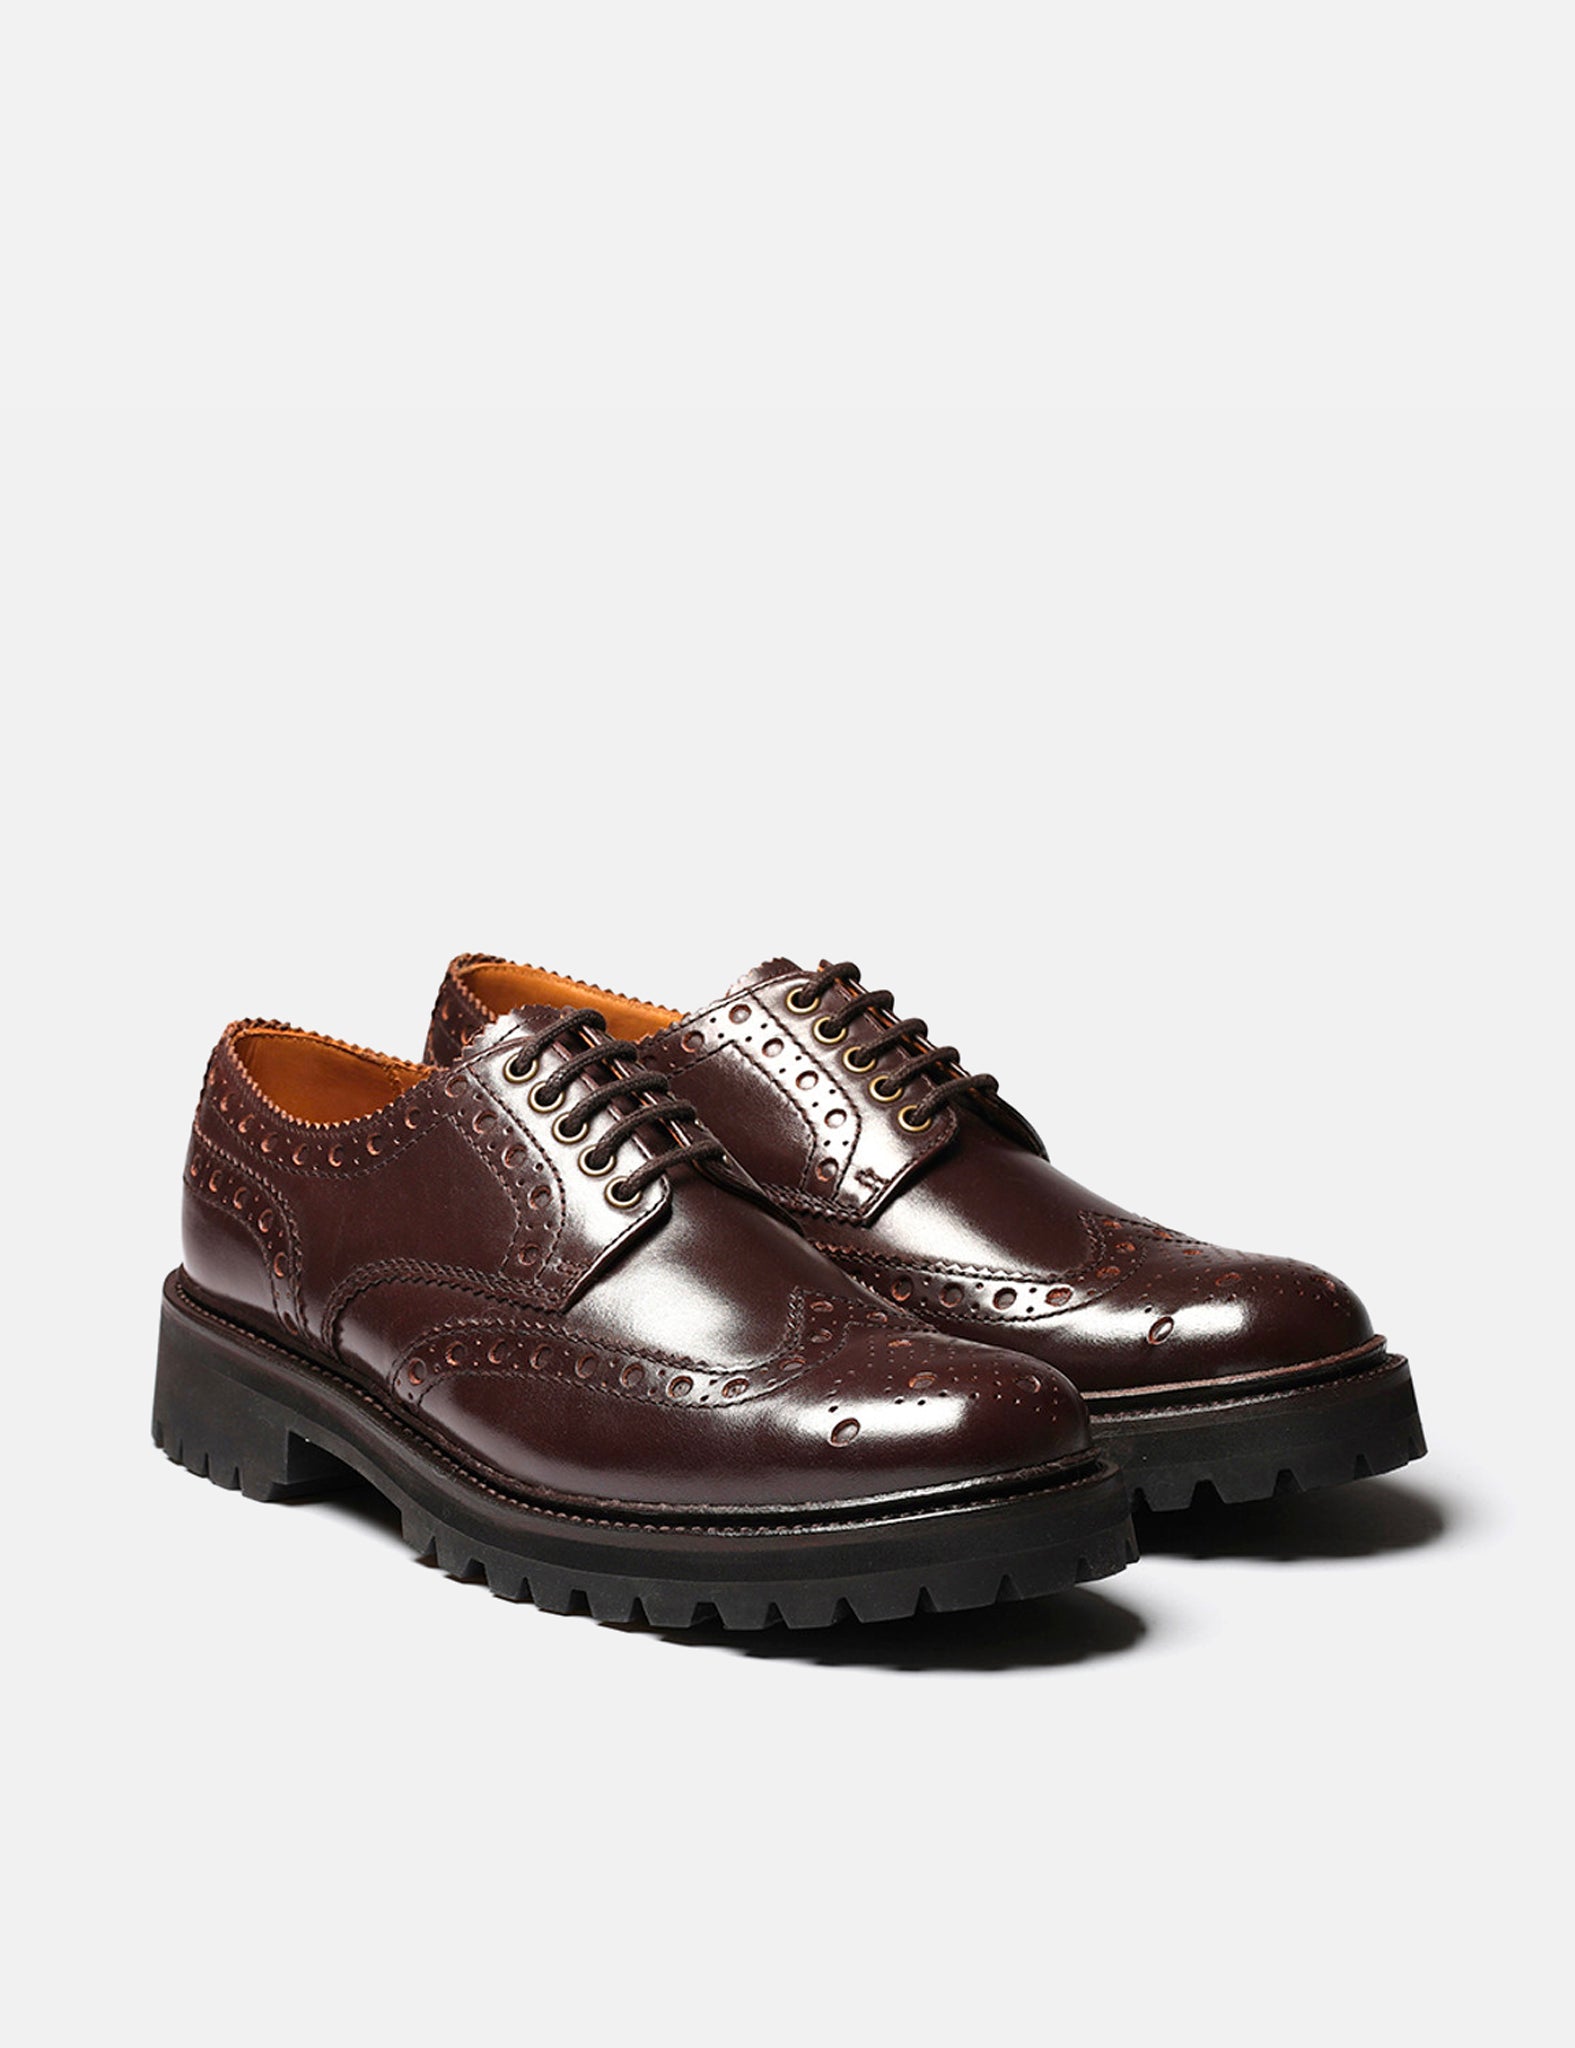 Grenson Archie Brogue (Colorado Leather) - Brown I Urban Excess ...